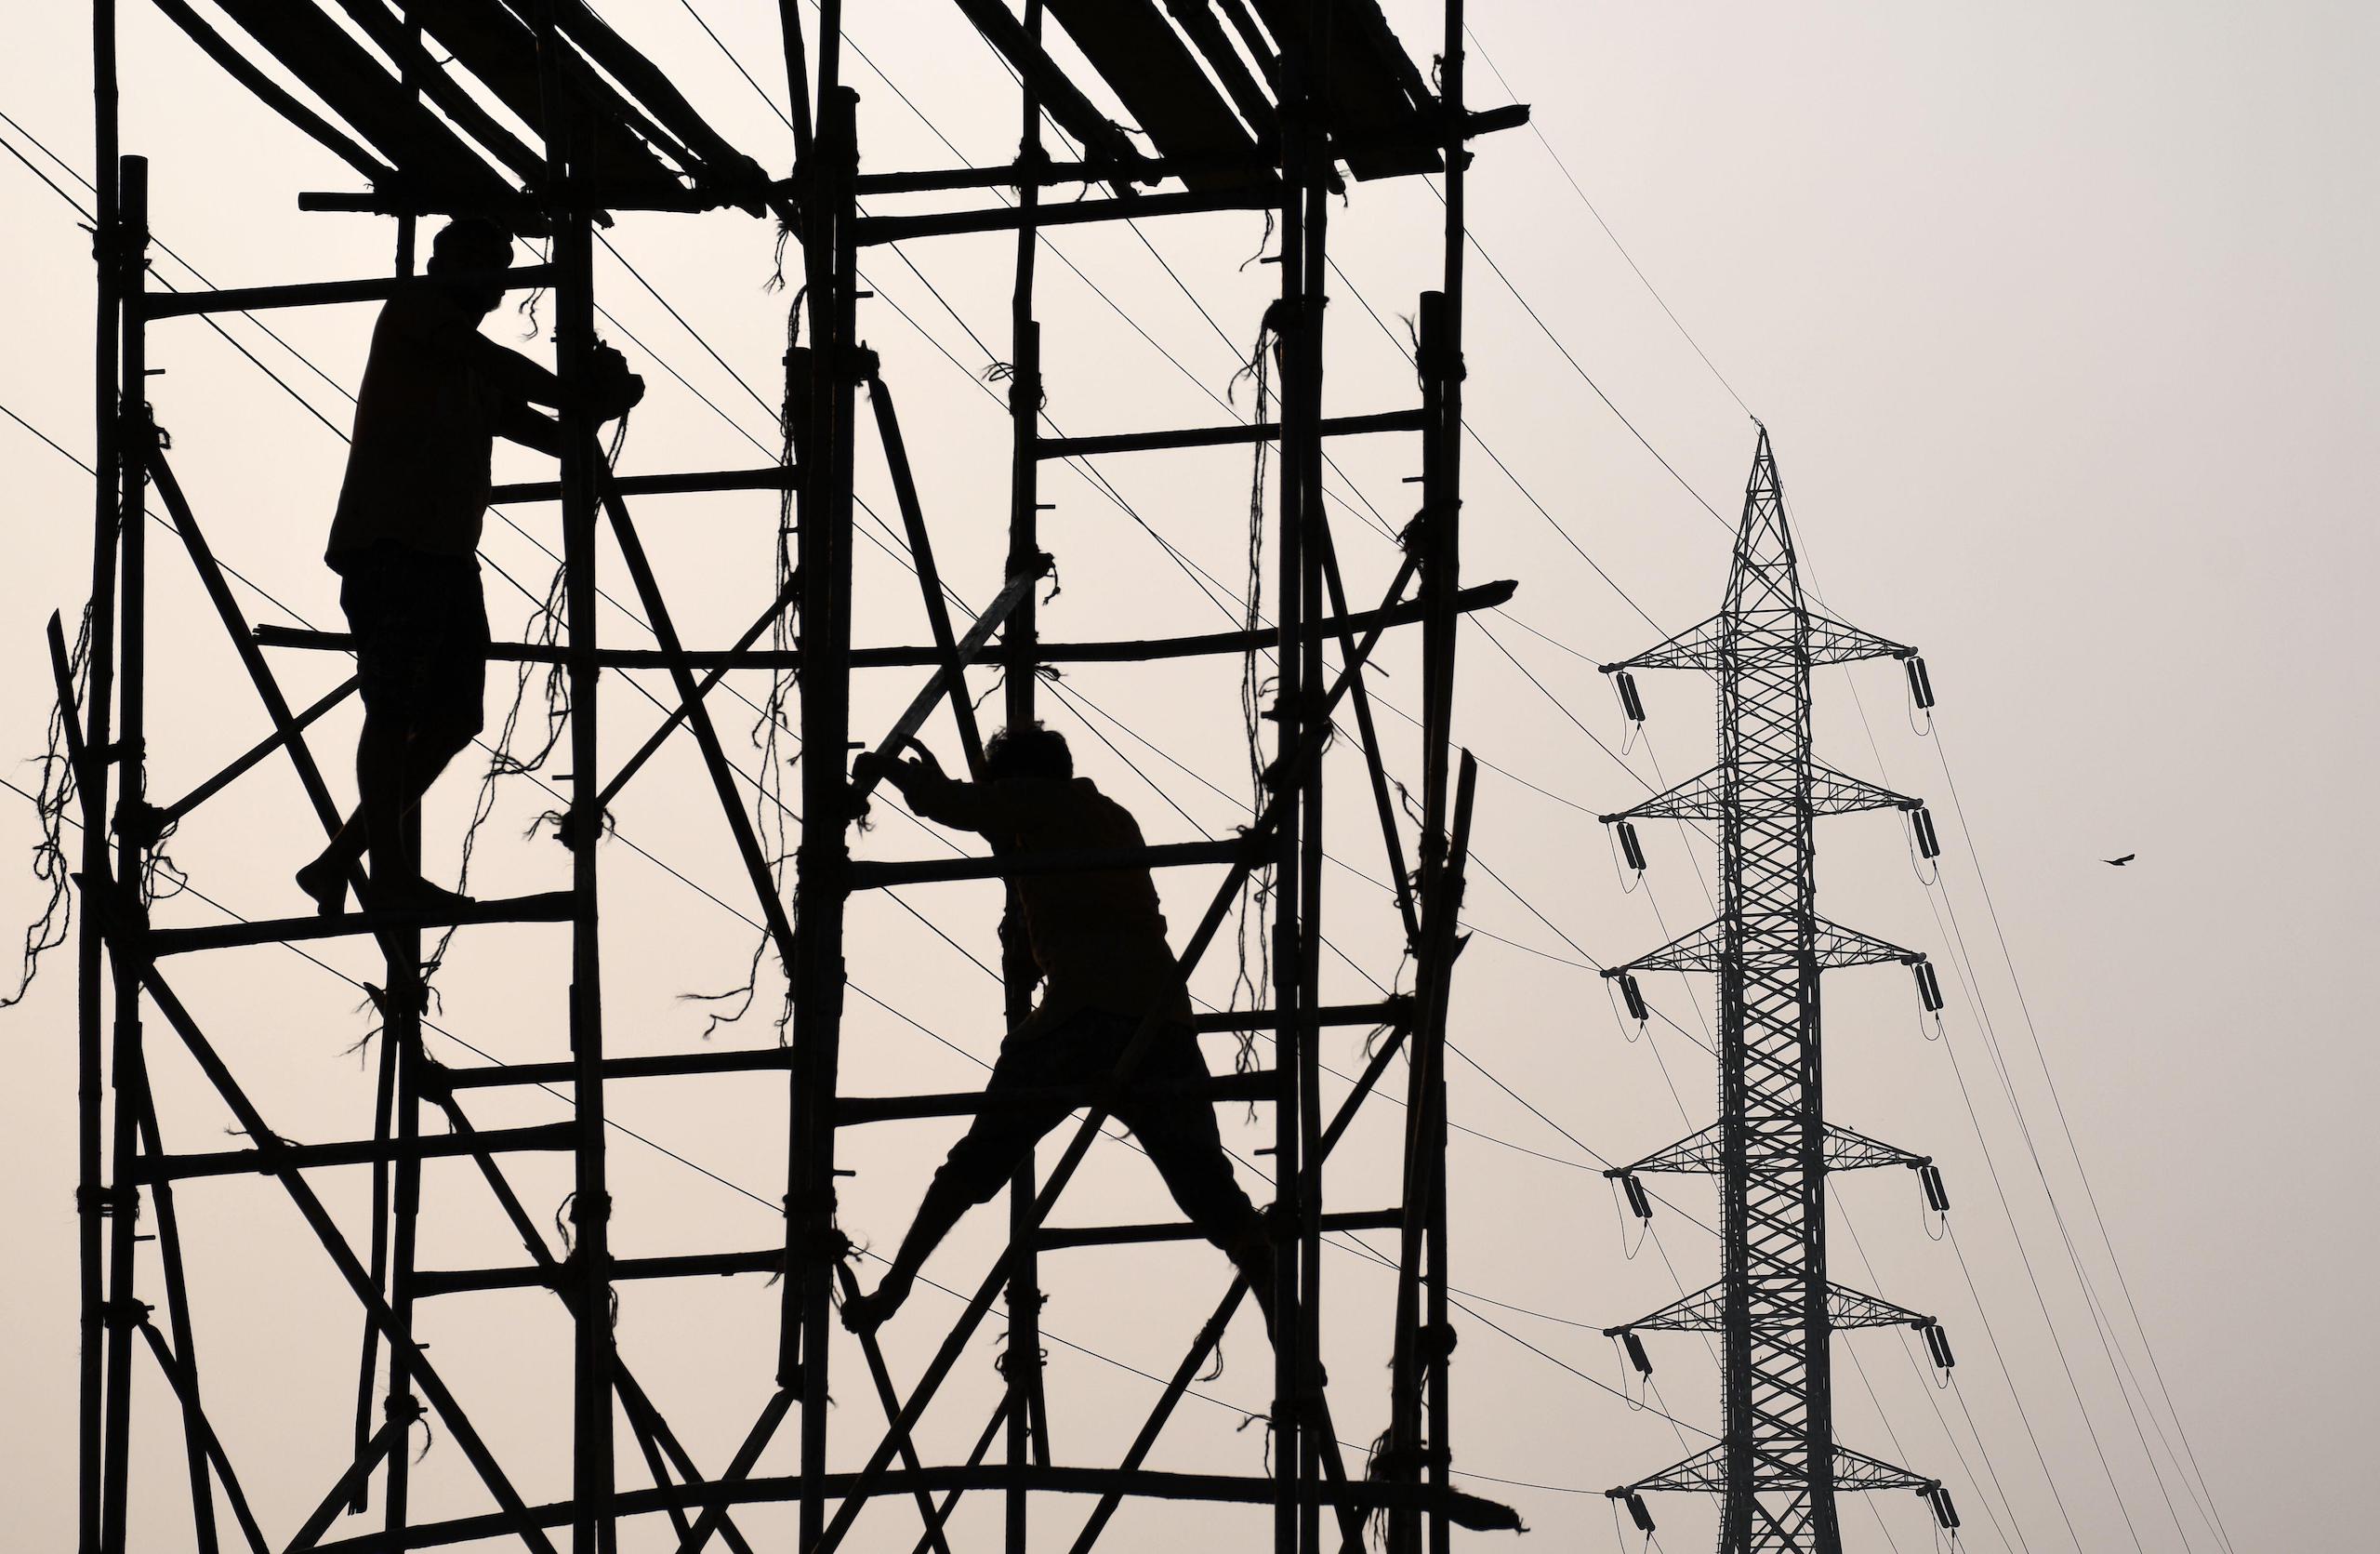 <p>Workers on bamboo scaffolding near electricity pylons in Mumbai. One of the obstacles to India reaching its pledged 50% installed electricity generation capacity from non-fossil fuel sources is the fact that there has been little progress in modernising the electricity transmission and distribution network so that it can handle decentralised power-generation sources. (Image: Alamy)</p>